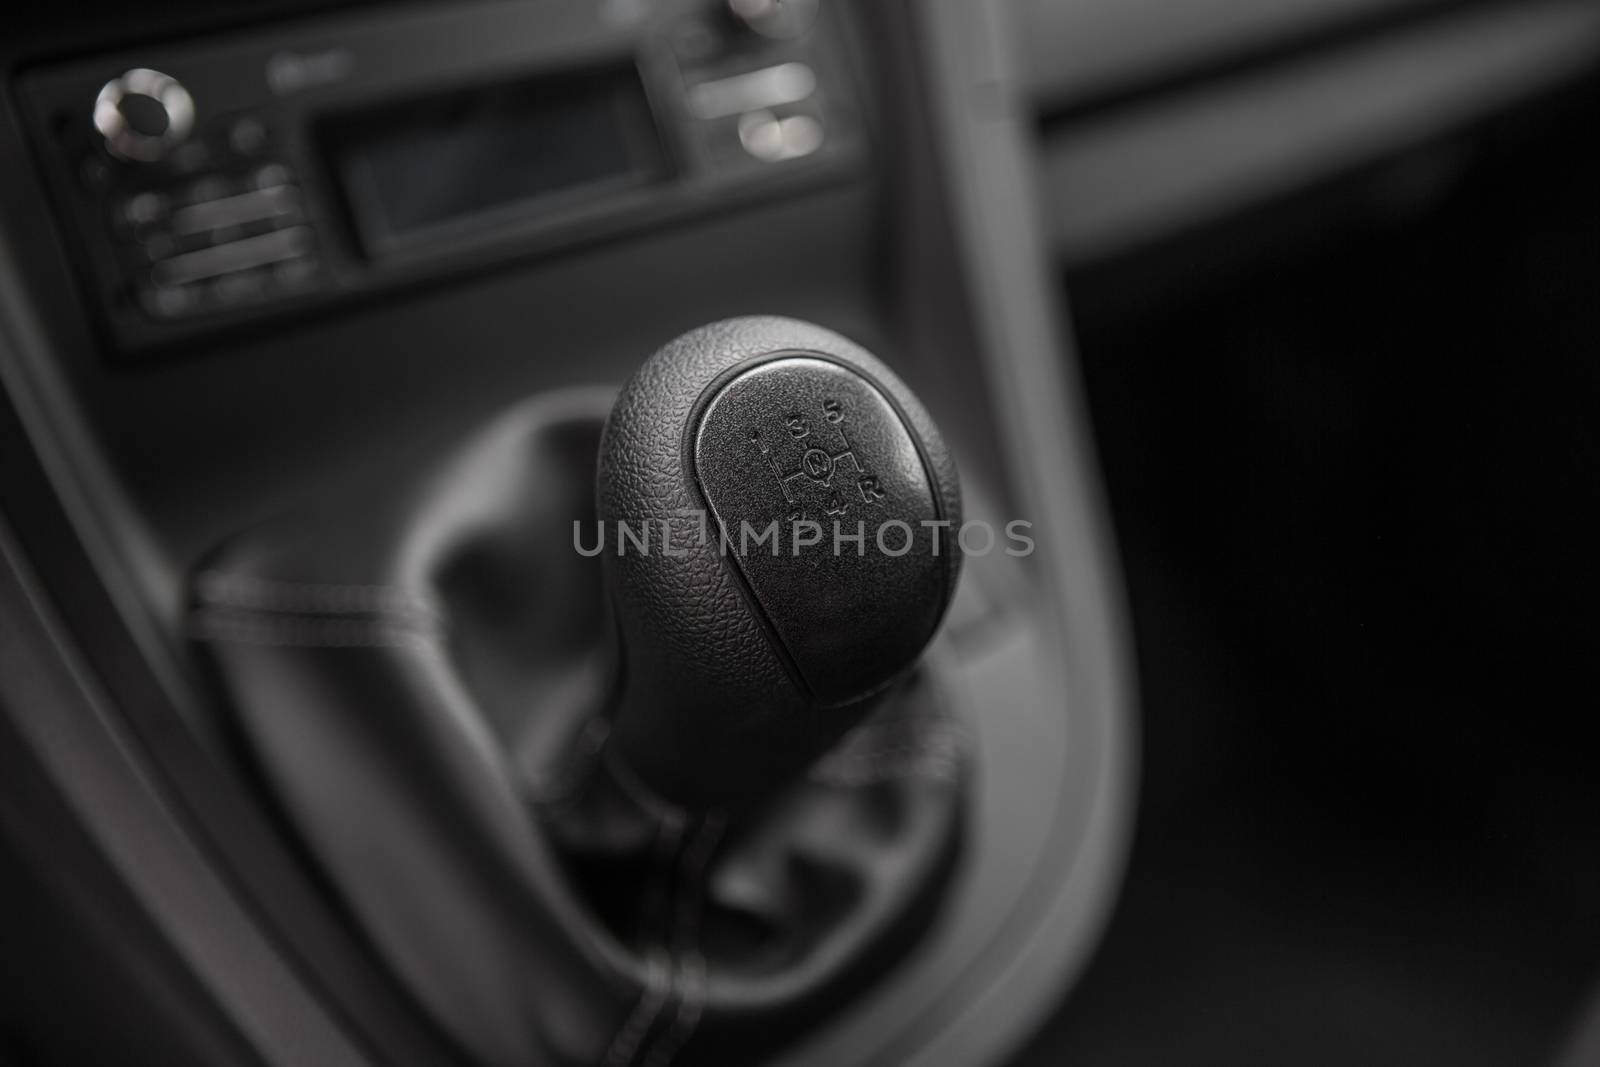 view of the manual gearbox. Closeup photo